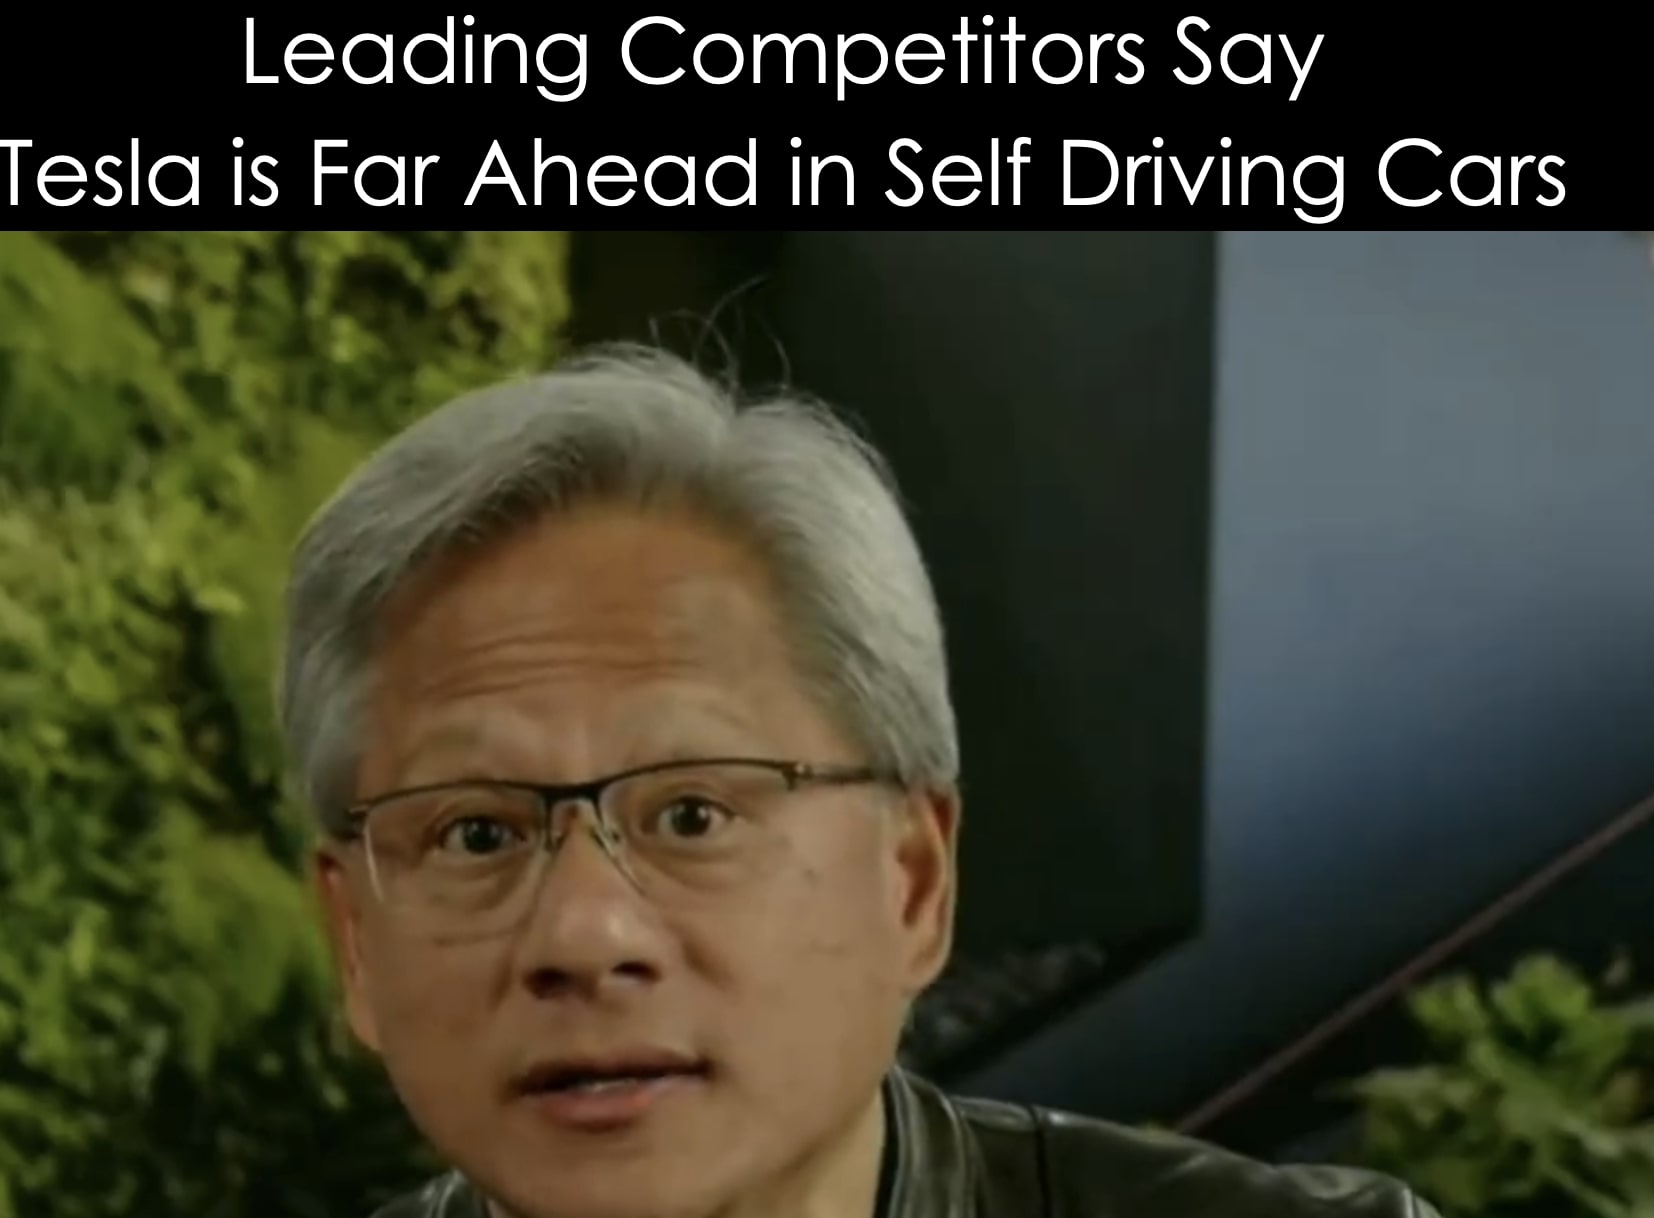 Leaders in Self Driving Cars Say Tesla is by Far the Leader